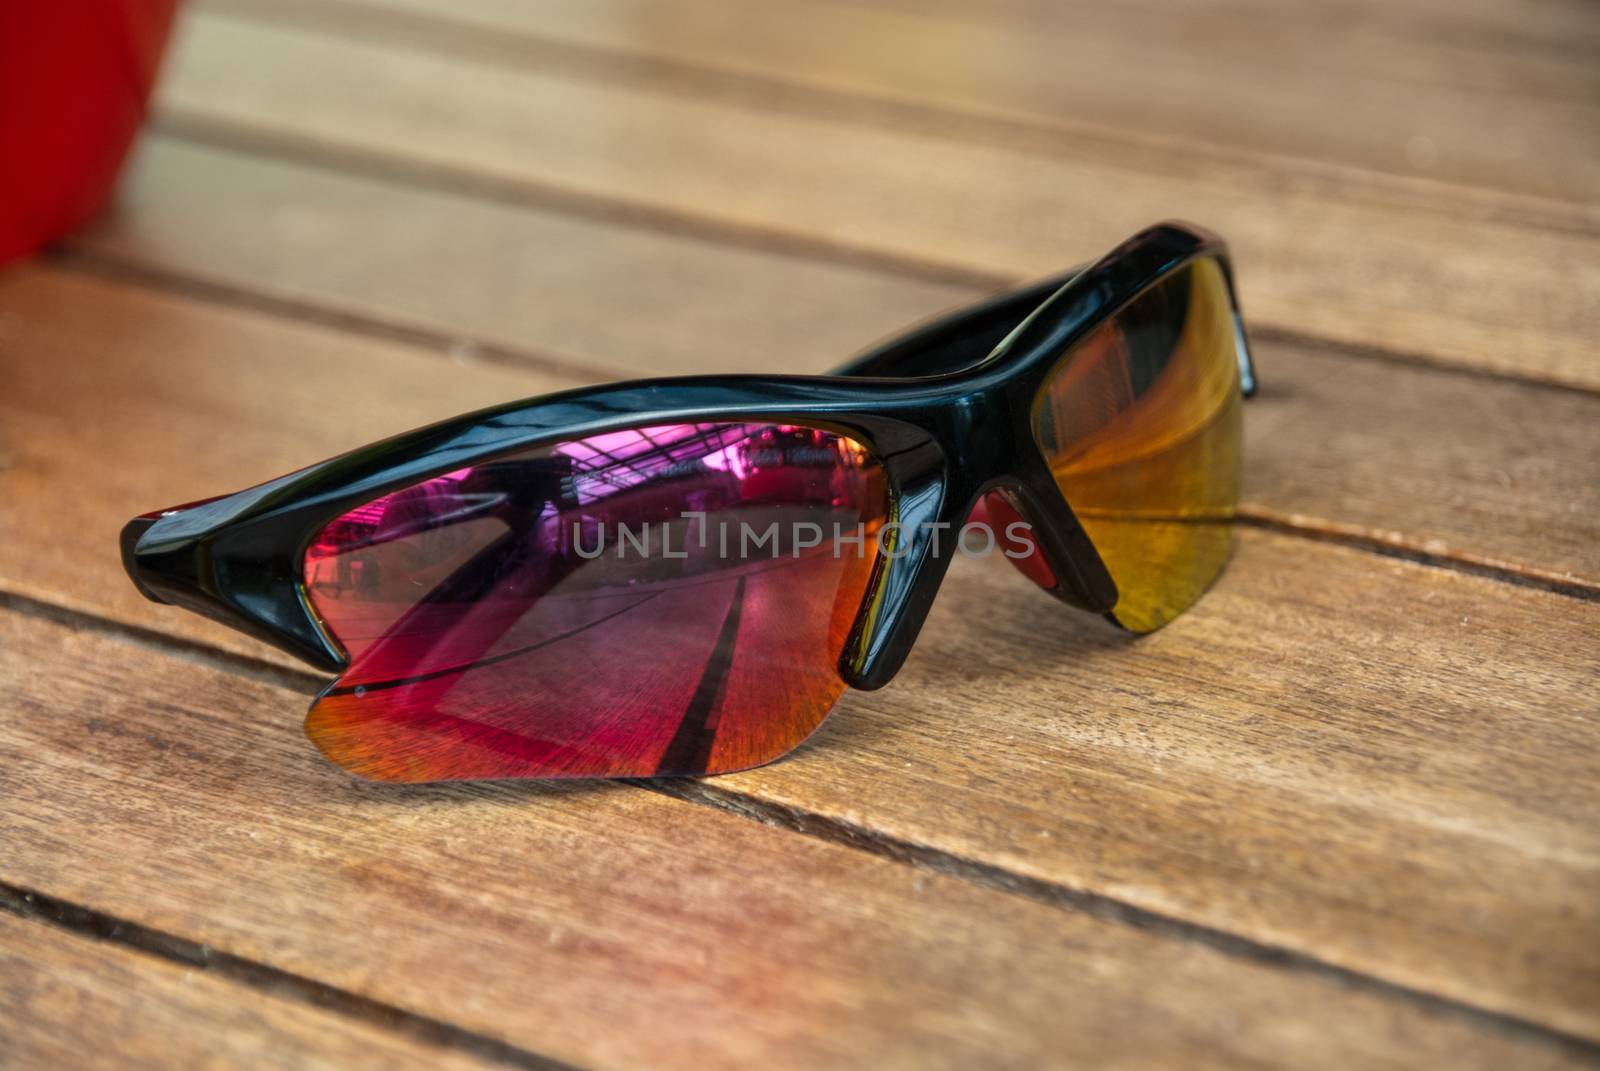 Red to yellow gradient sun glasses lying on wood table outside